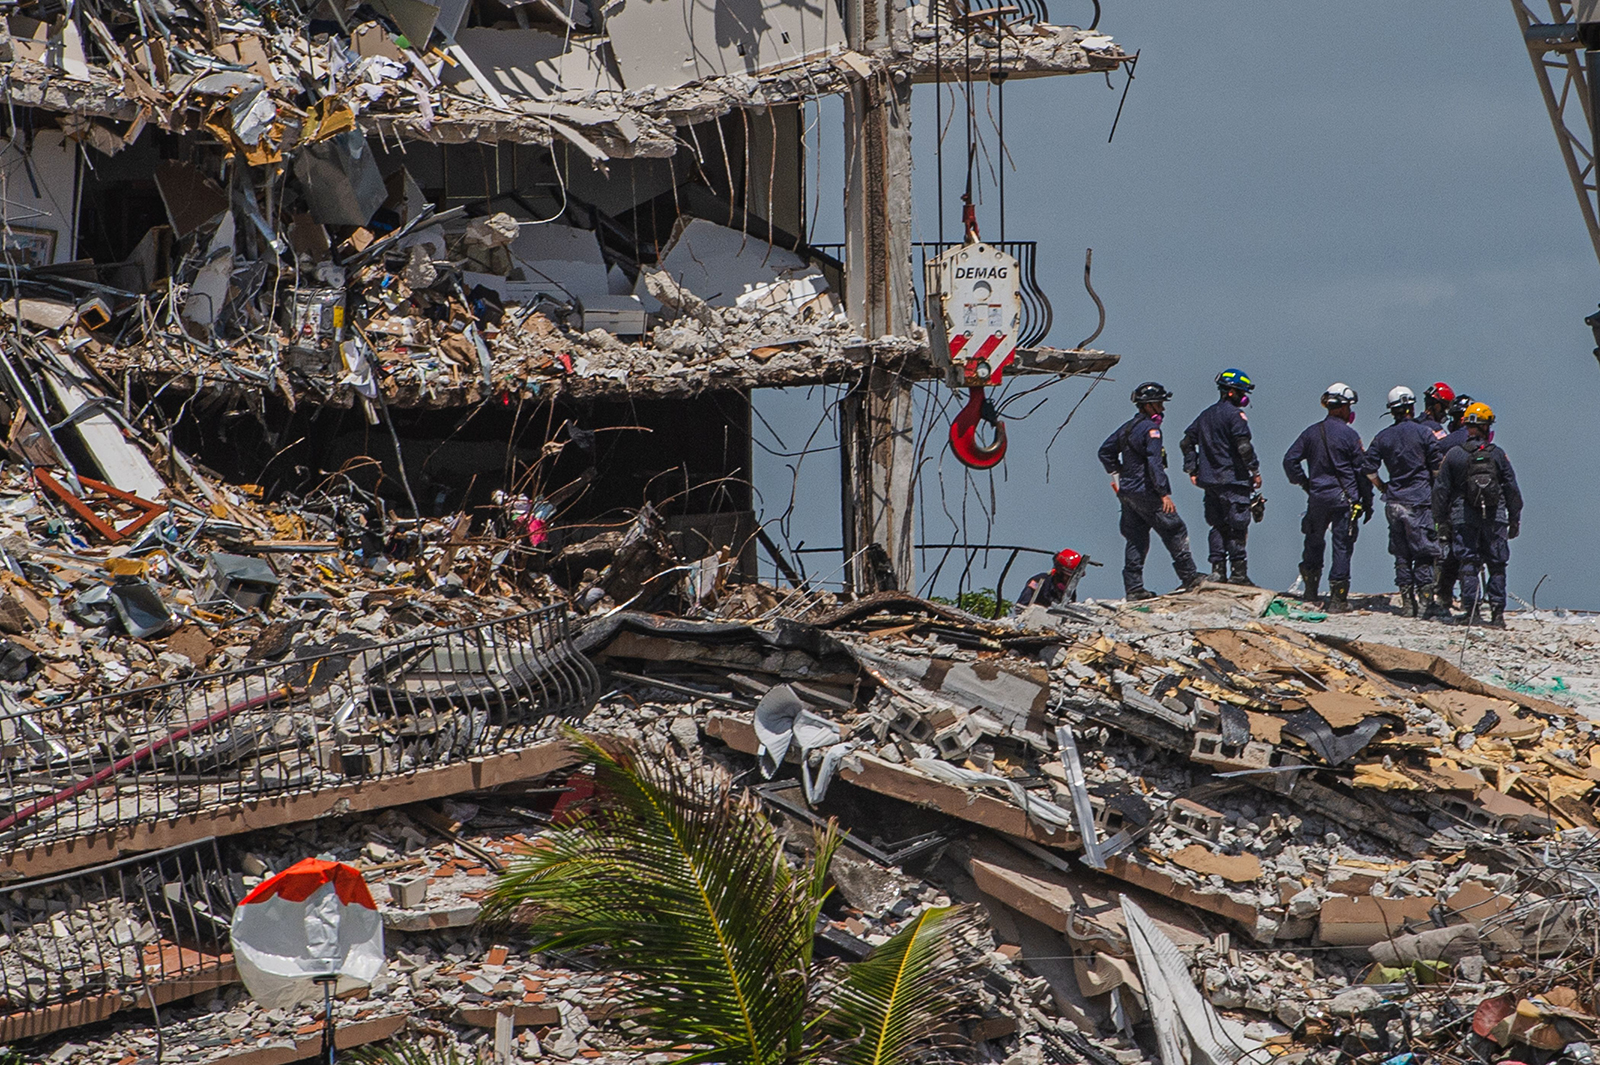 Search and Rescue teams look for possible survivors in the partially collapsed 12-story Champlain Towers South condo building on June 27, in Surfside, Florida.